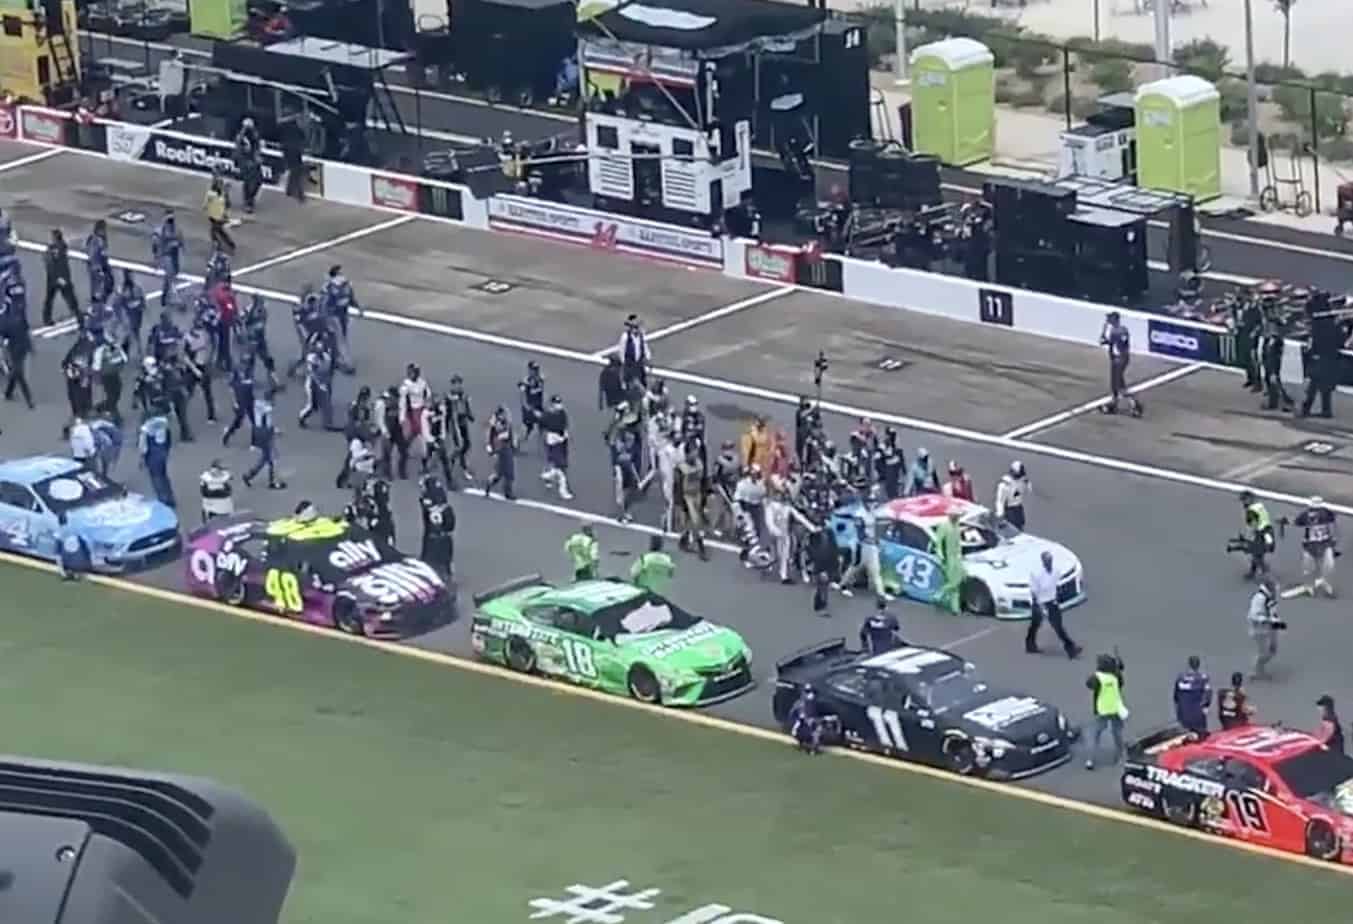 NASCAR drivers pushed Bubba Wallace's car to the front on Monday in response to a noose being found in the driver's garage.